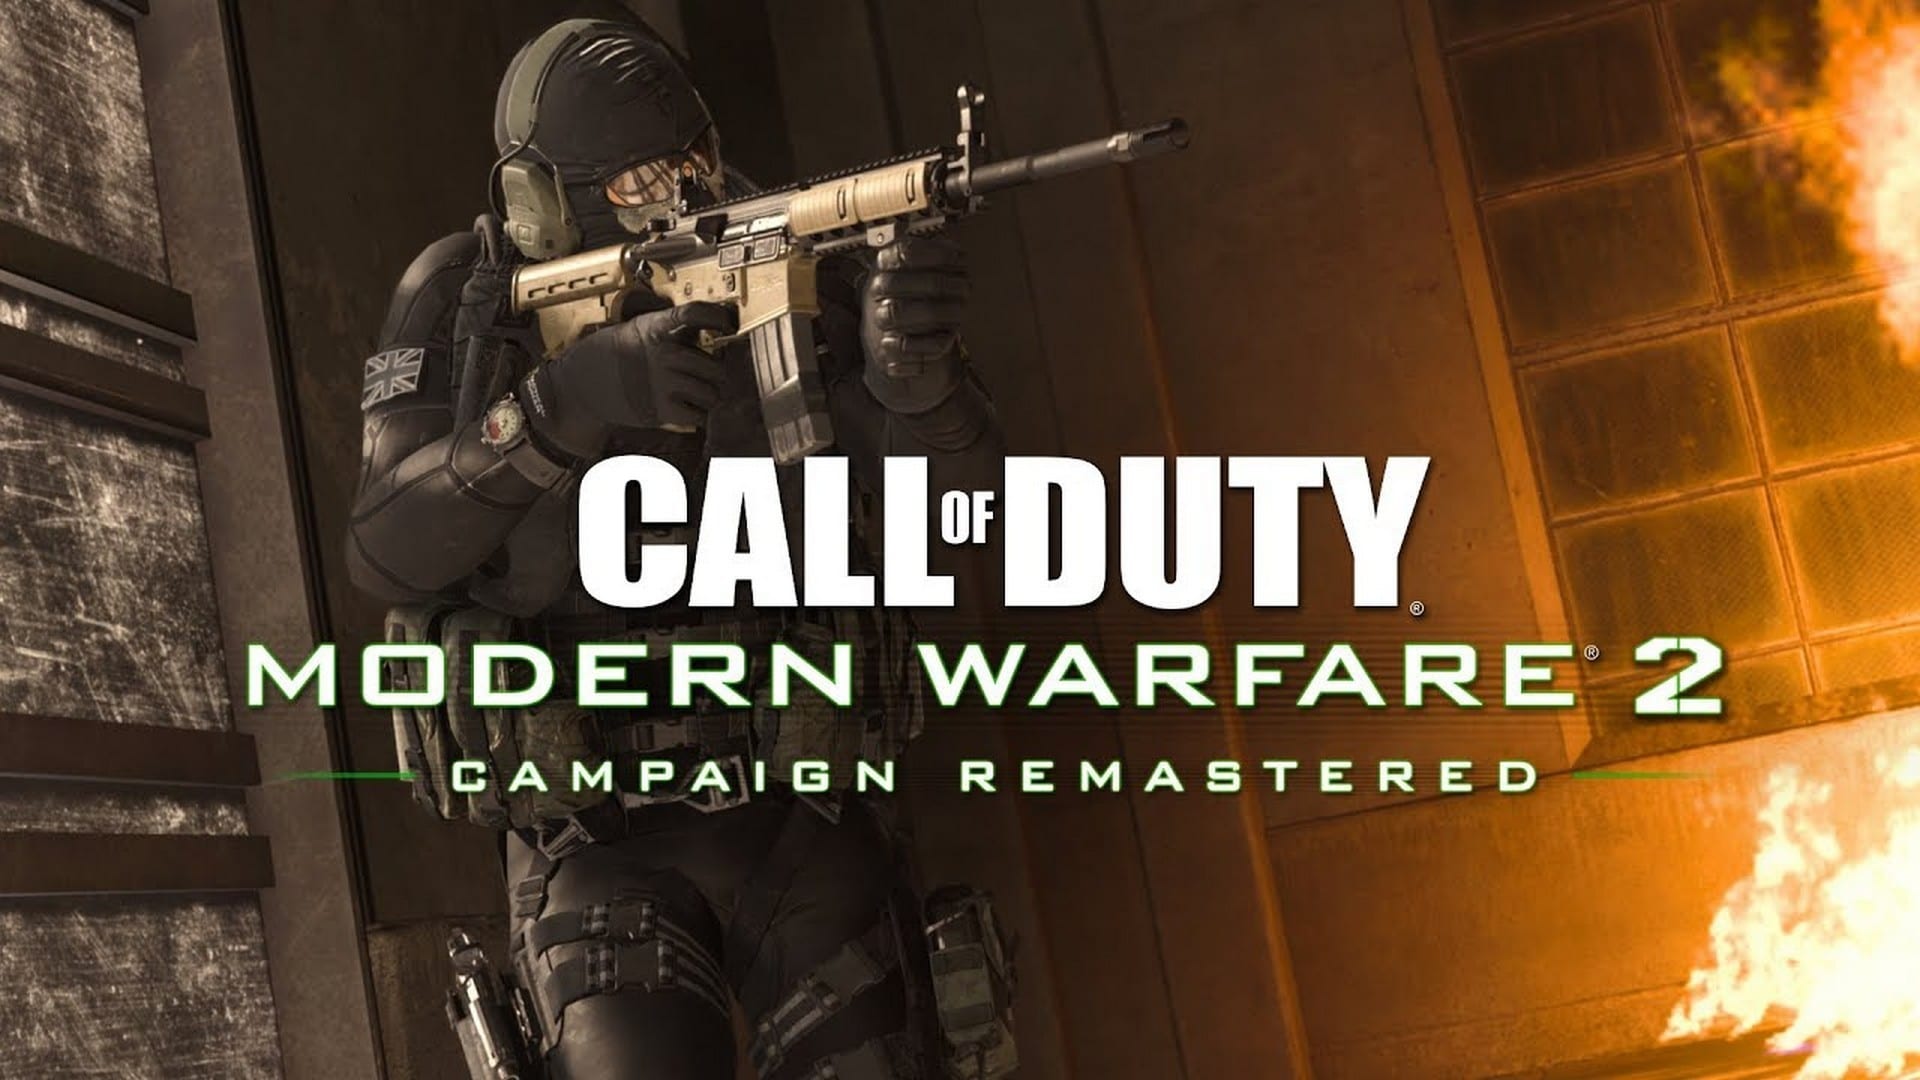 Call of Duty: Modern Warfare 2 Campaign Remastered - Available Now On